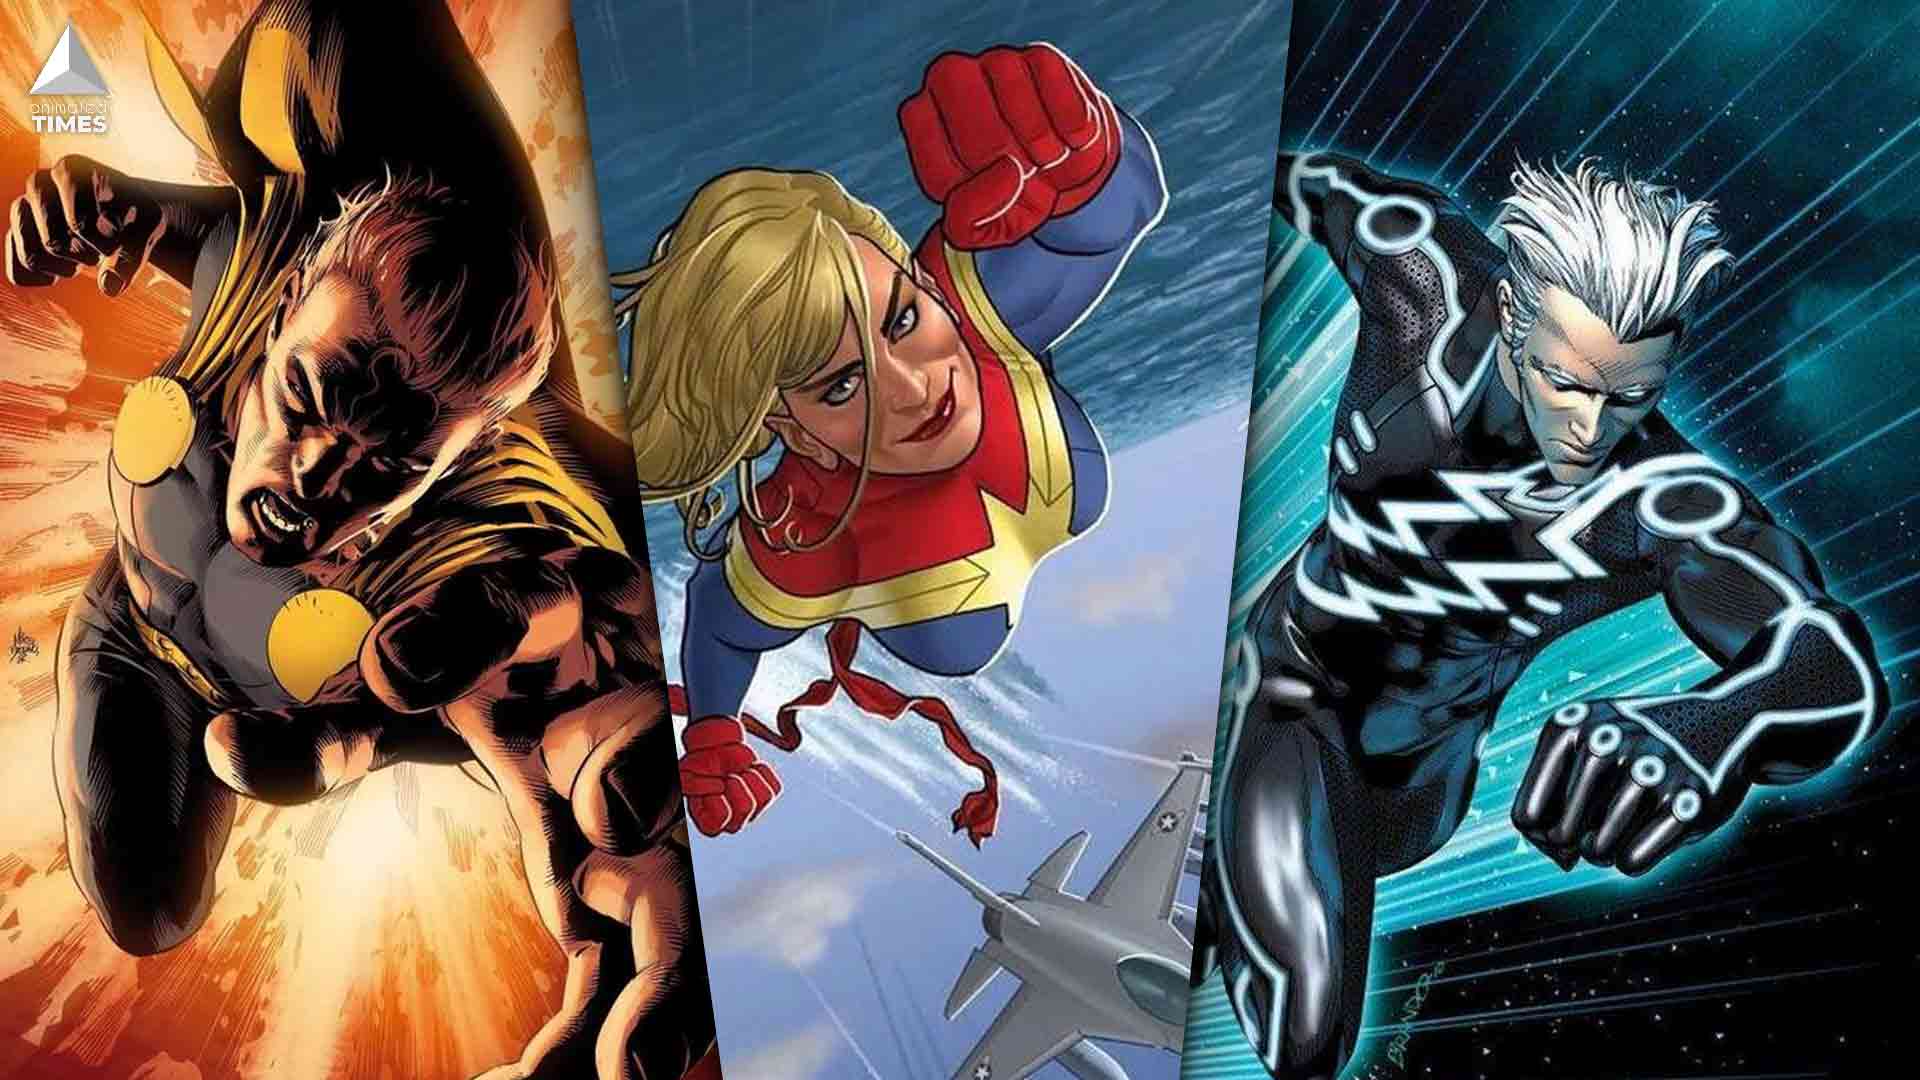 17 Super Speedsters Of The Marvel Universe Ranked According To Their Speed